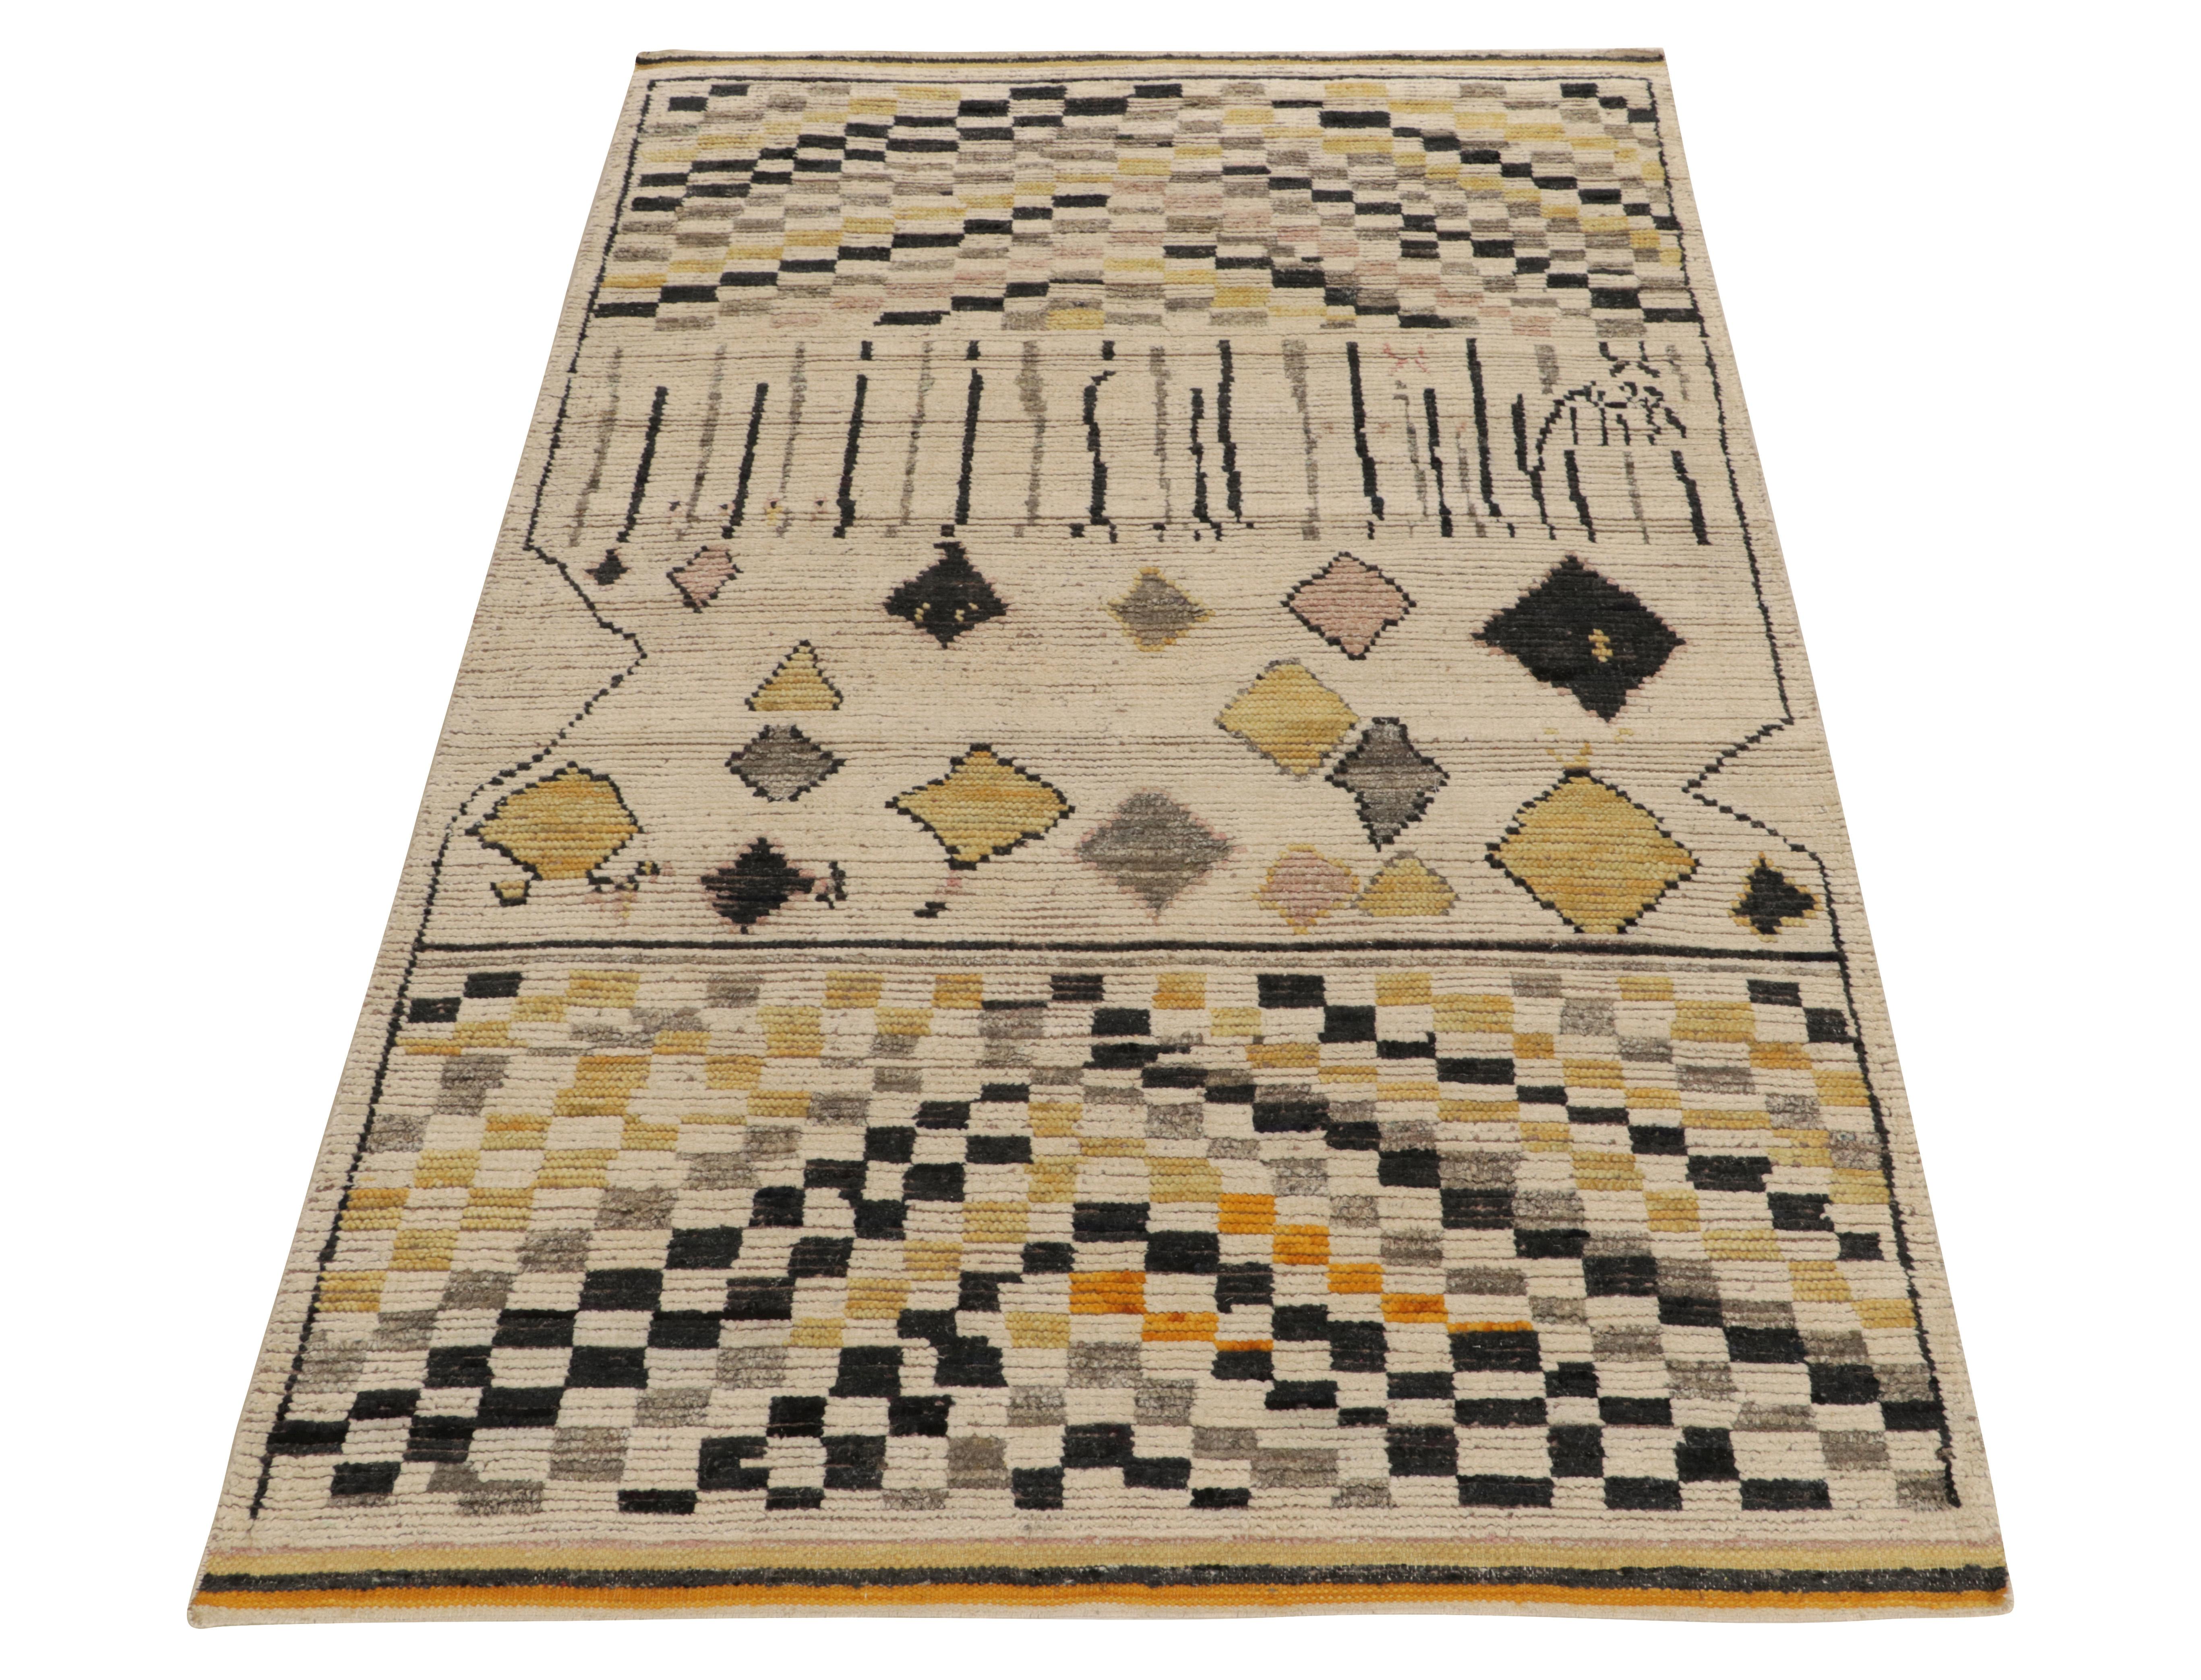 Rug & Kilim’s original tribute to Moroccan rug design connoting celebrated tribal aesthetics. Carrying a luscious healthy pile, the rendering features variegated diamond patterns in gold, gray & black atop off-white concluding to a multicolor